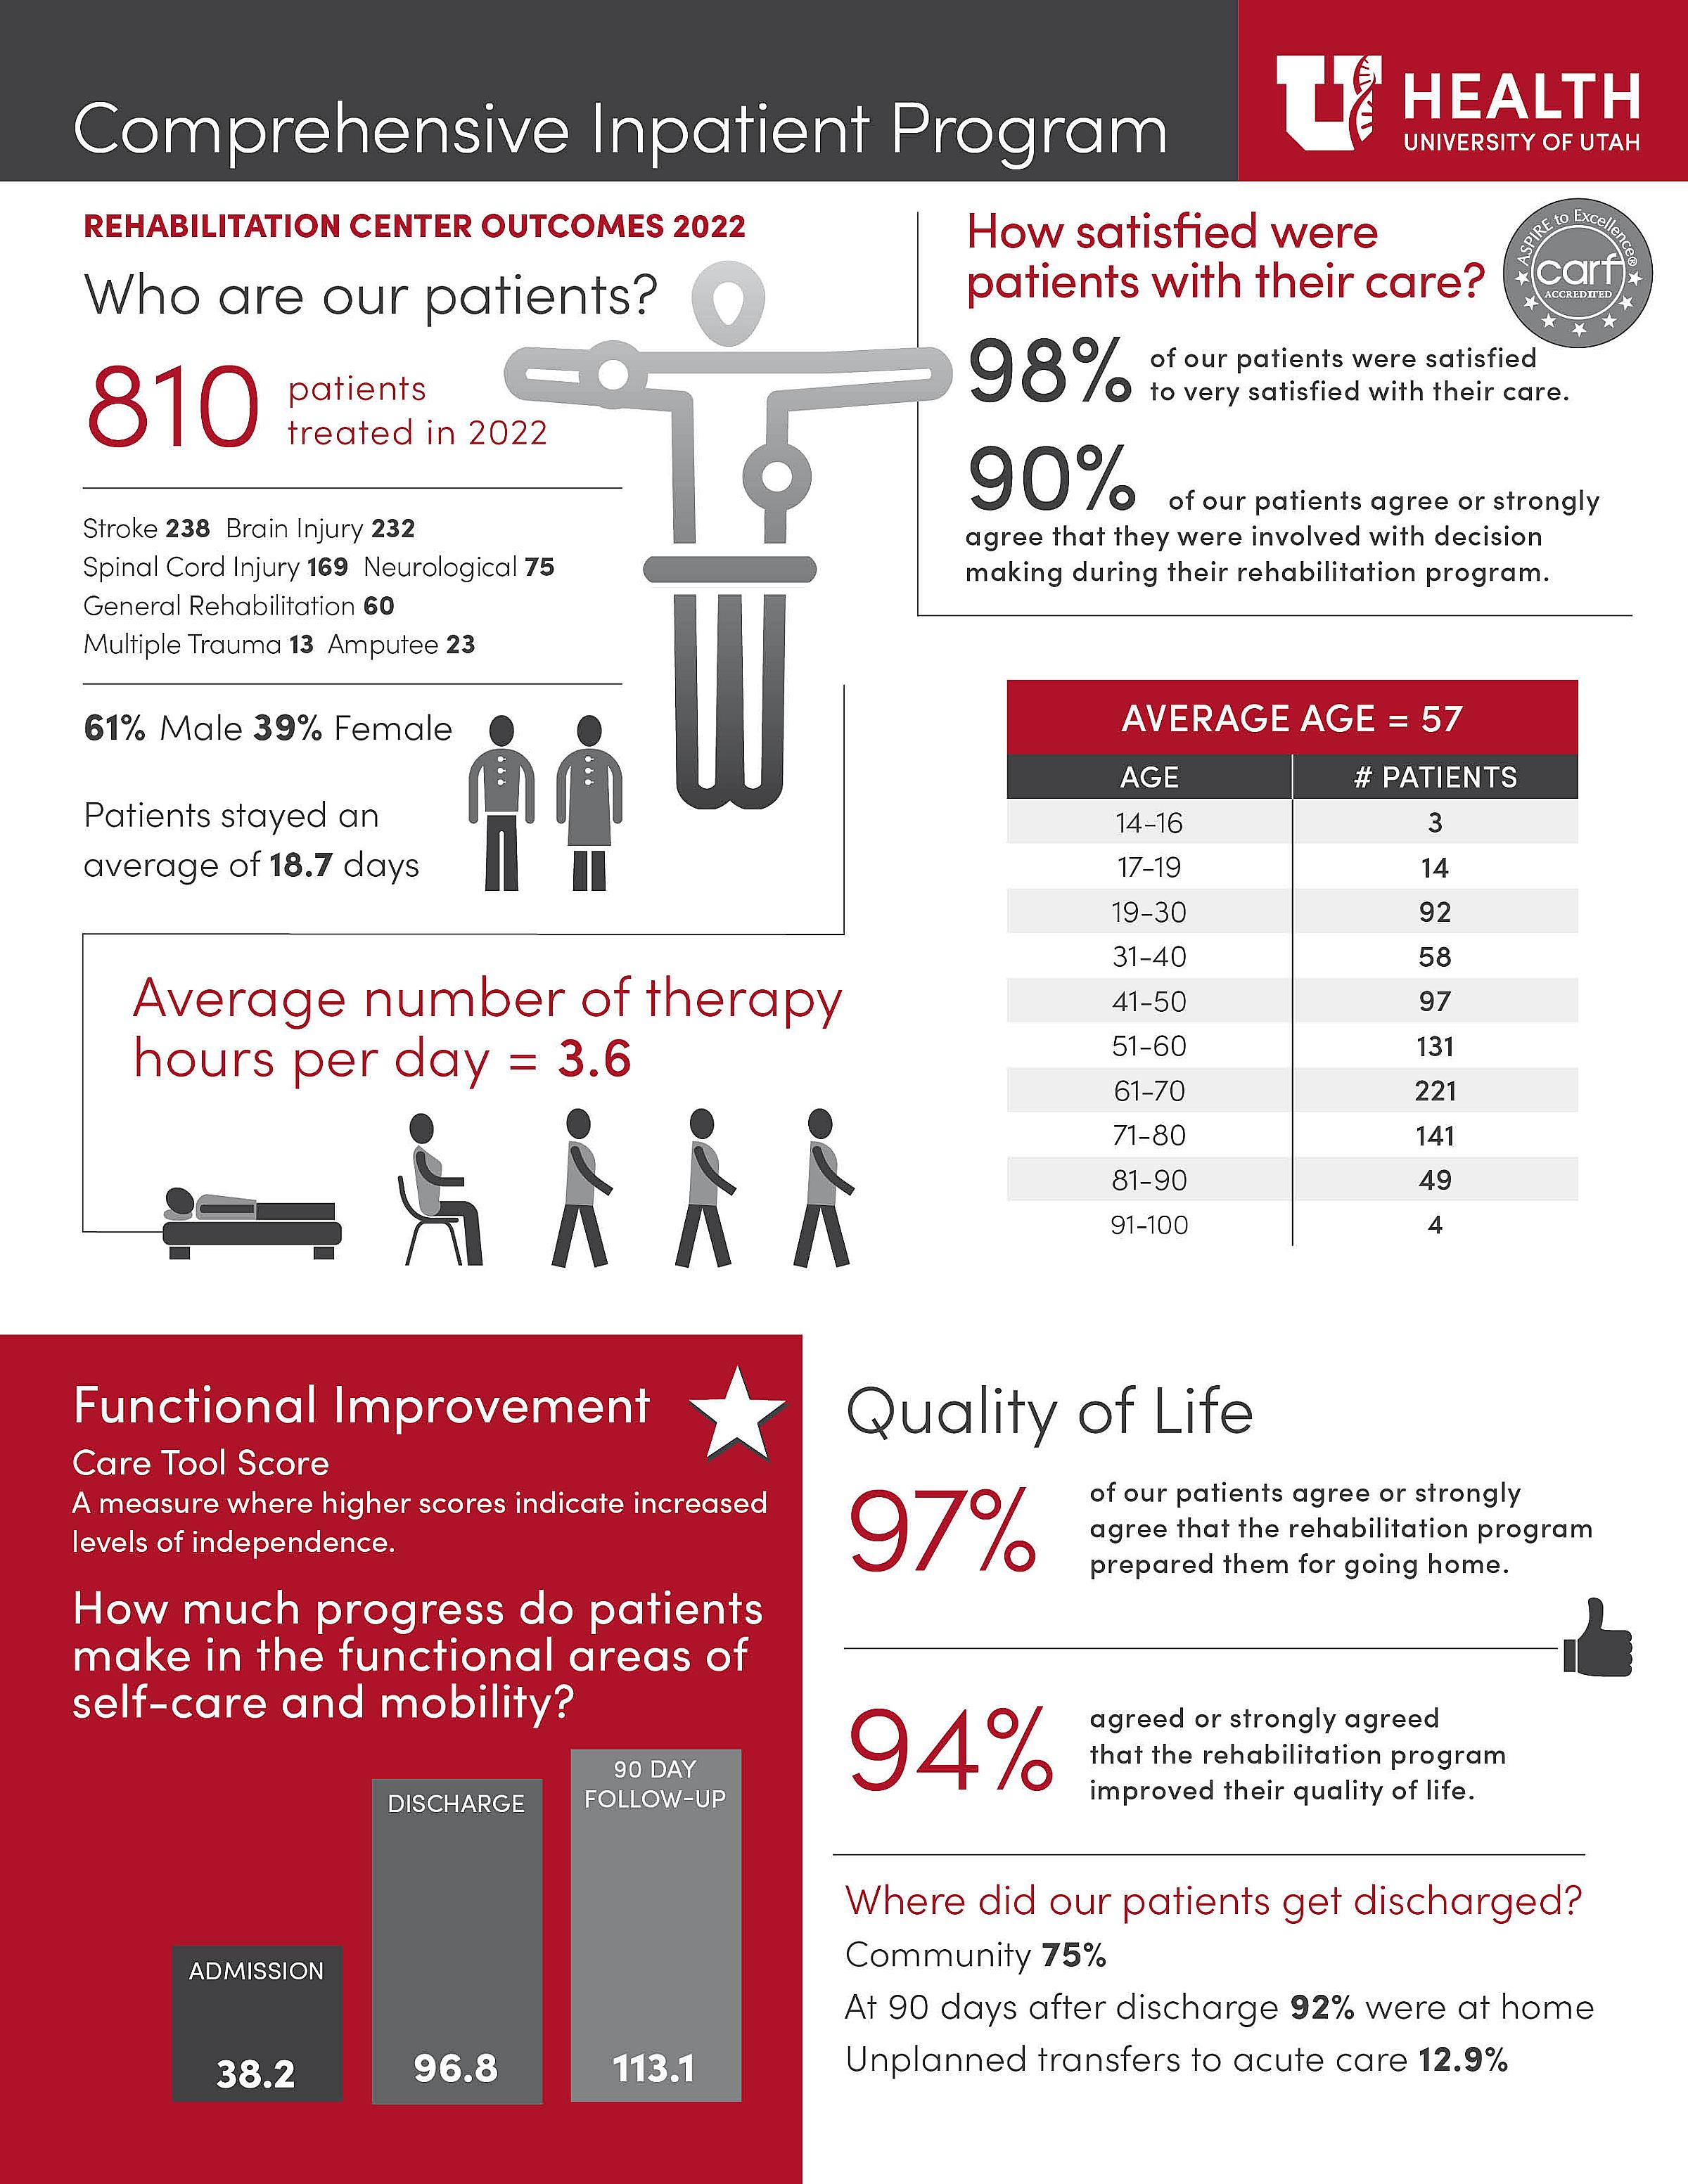 A visual summary of data that shows outcomes achieved by patients who completed inpatient rehabilitation at Craig H. Neilsen Rehabilitation Hospital in 2022.